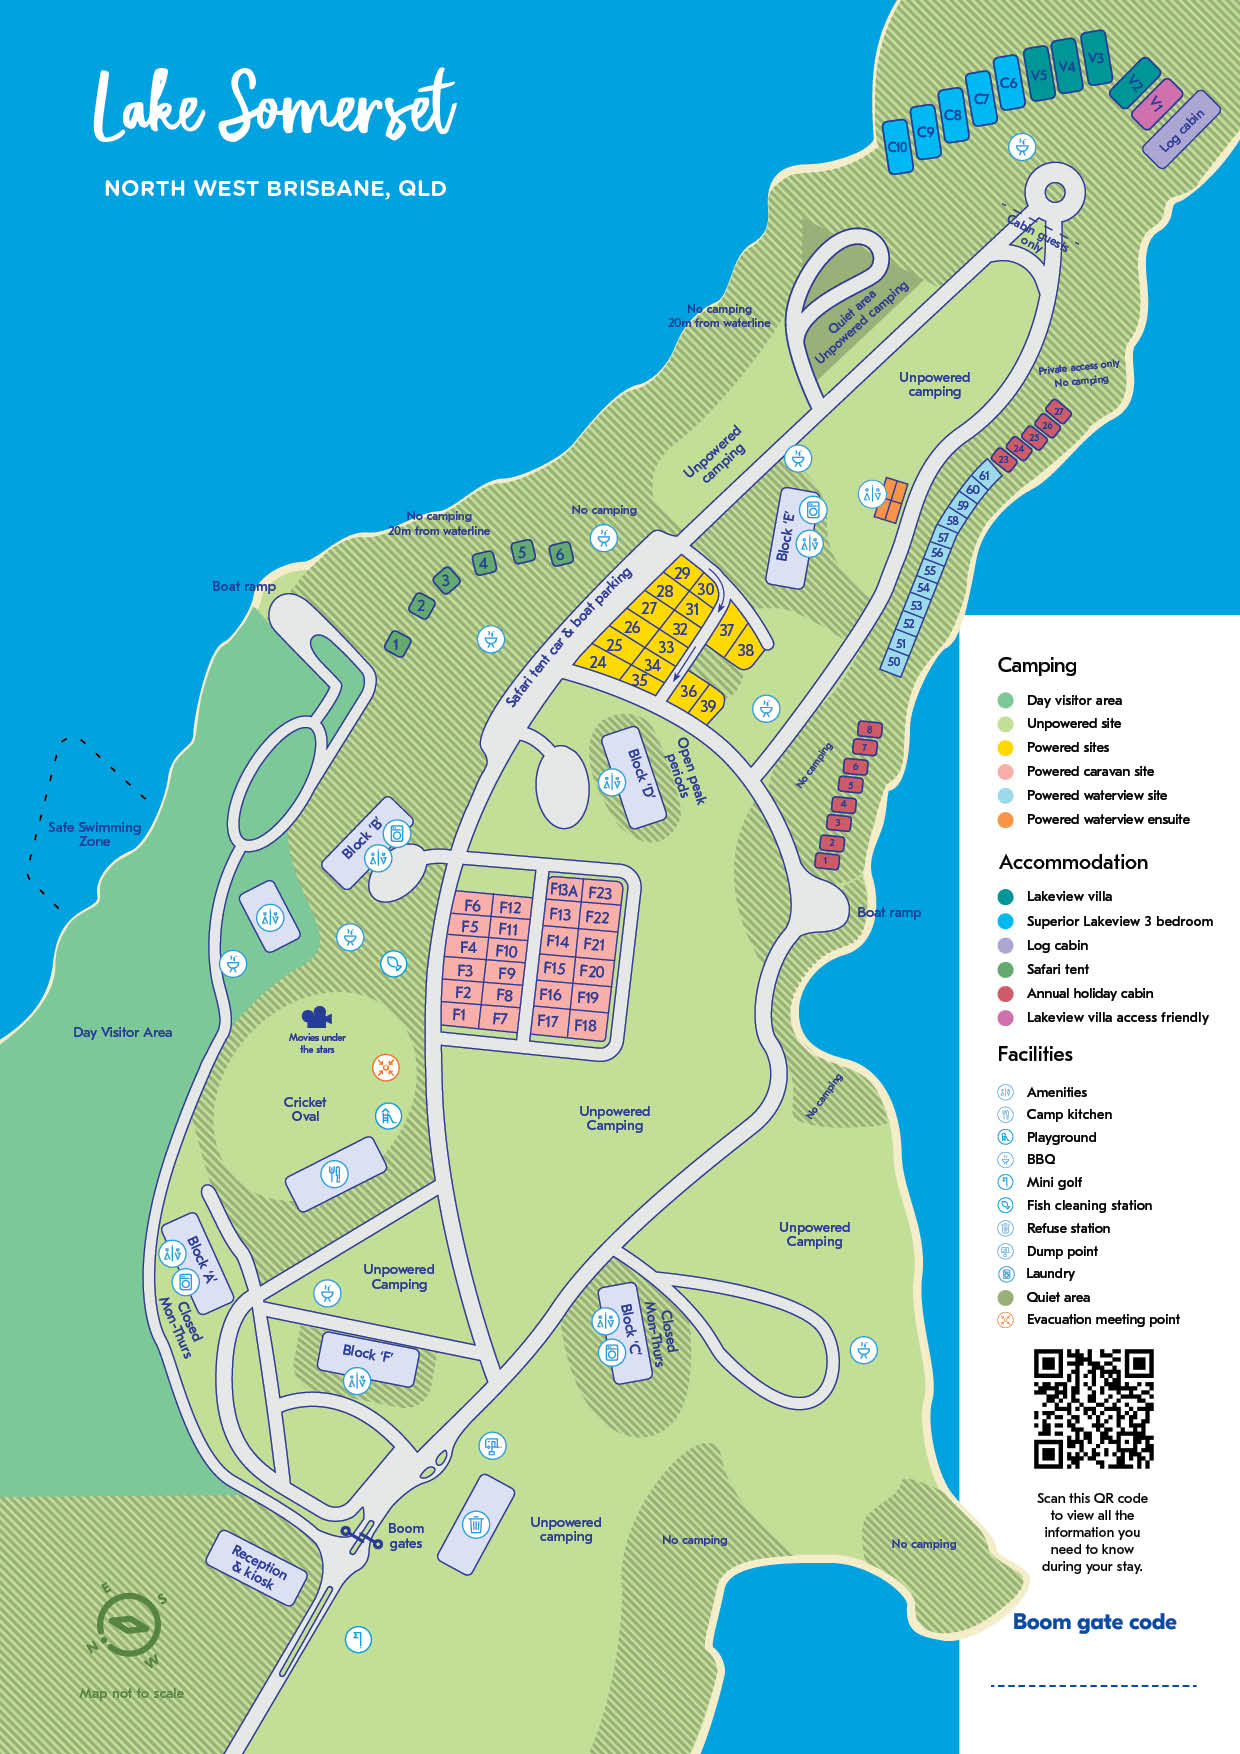 Lake Somerset park map and rules